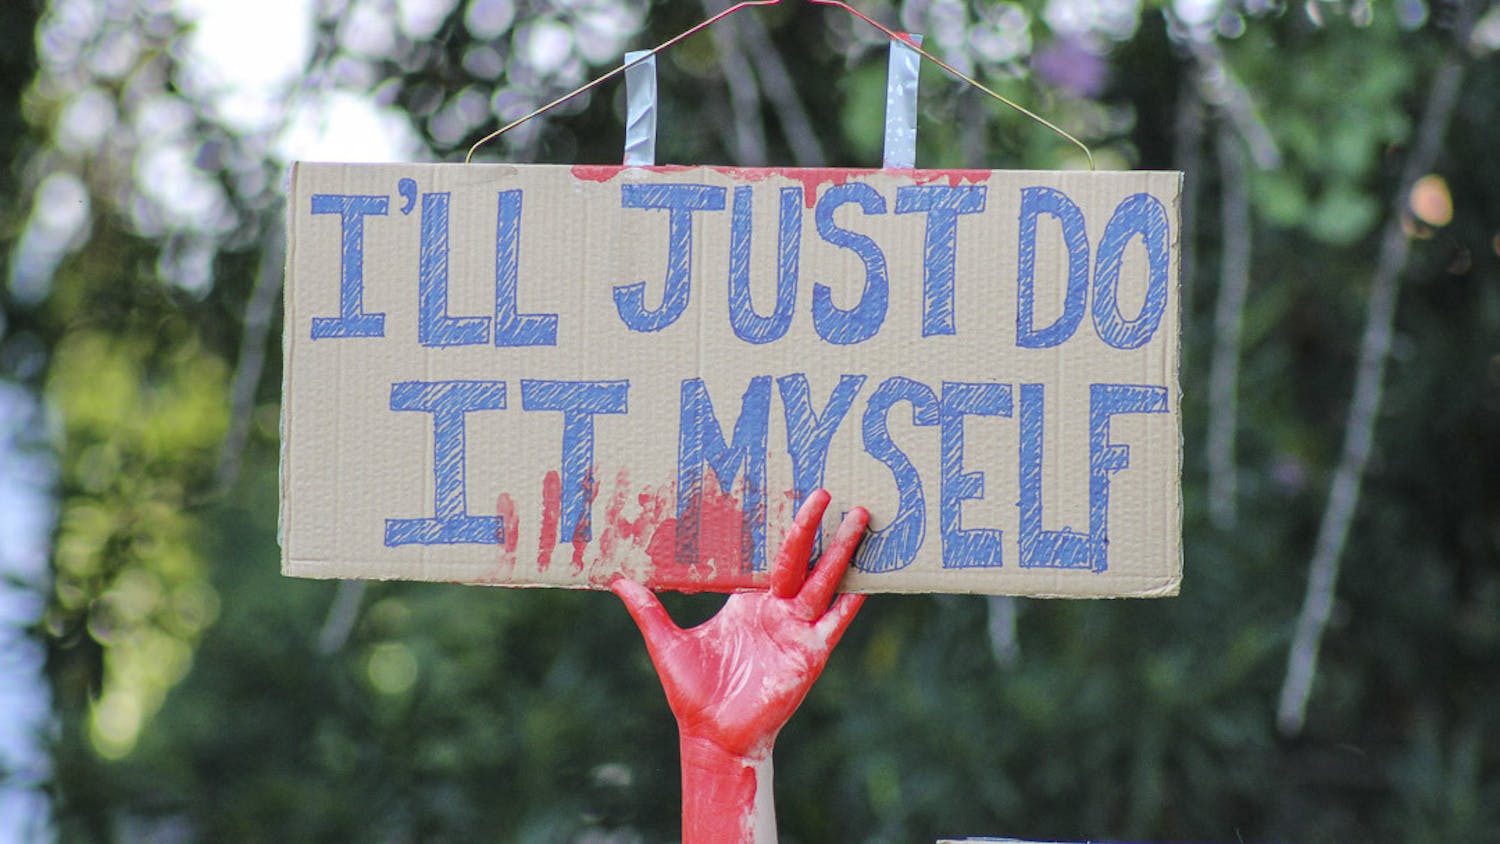 A protester covered in blood-colored paint holds up a pro-abortion sign labeled “I’ll Just Do It Myself” during the Dobbs v. Jackson protest at the South Carolina state capitol on June 25, 2022. The protest came as a response to the overturning of the landmark Roe v. Wade case earlier that June.